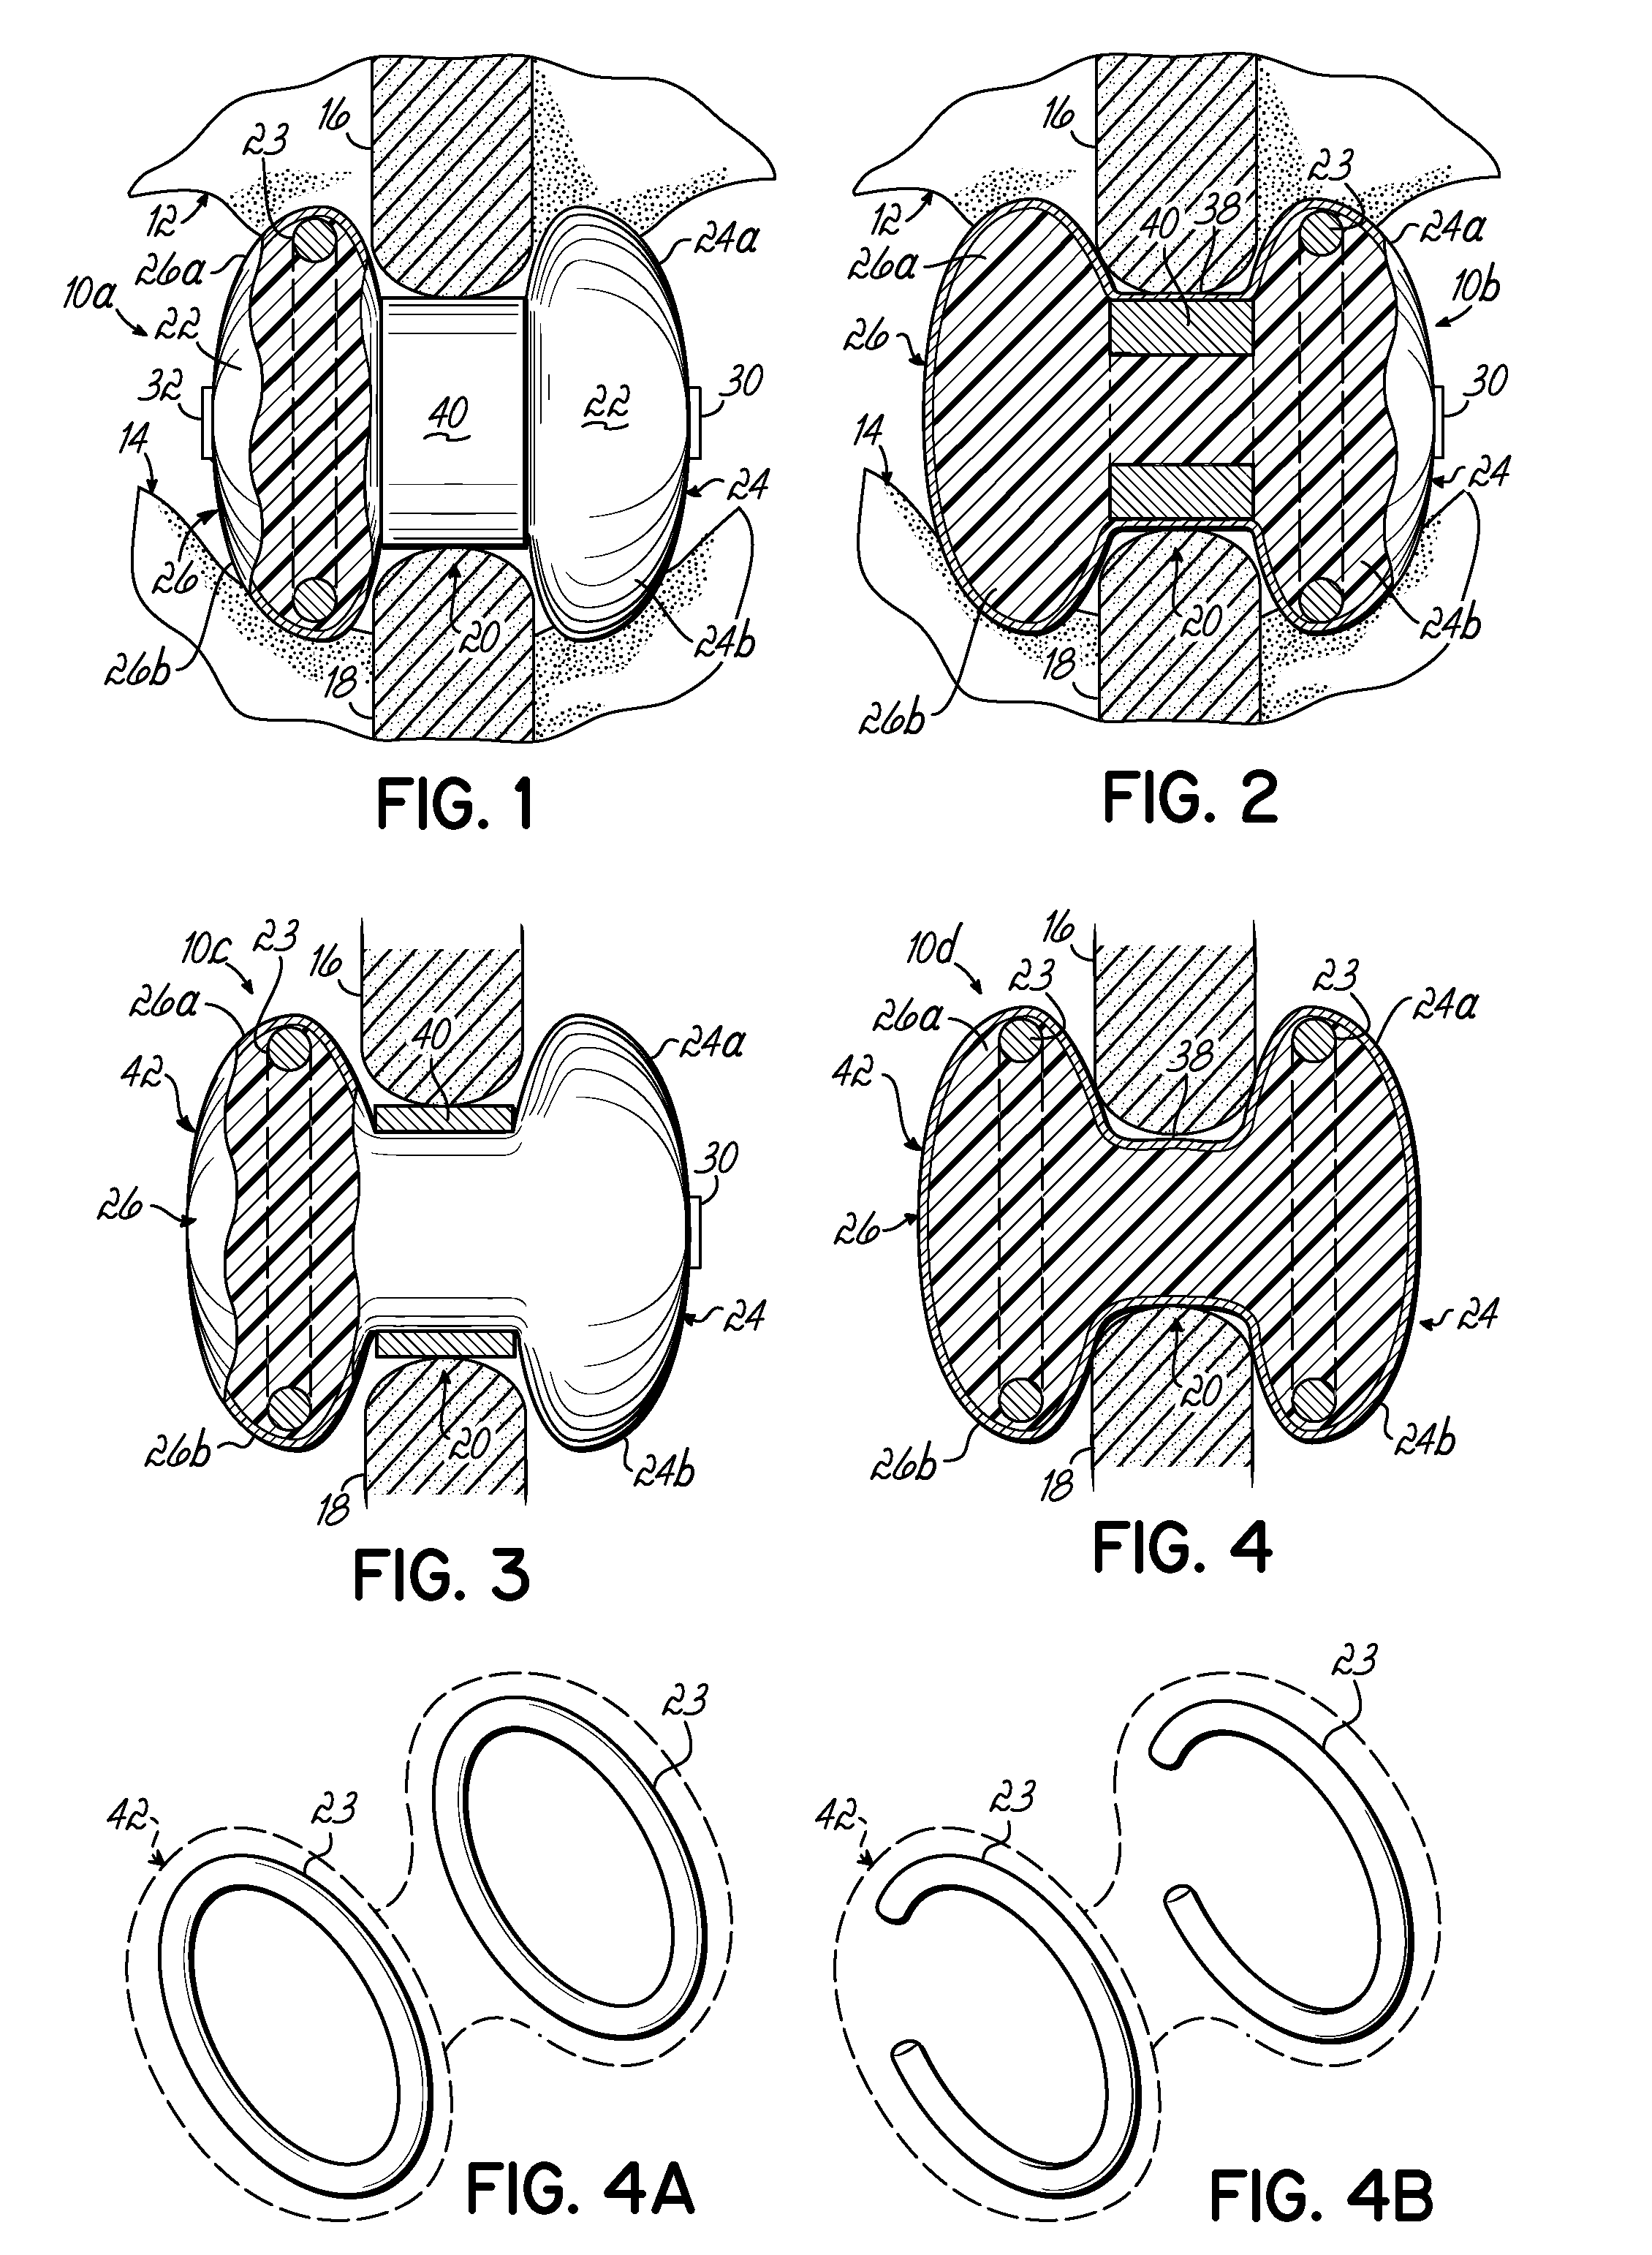 Expandable interspinous process spacer with lateral support and method for implantation